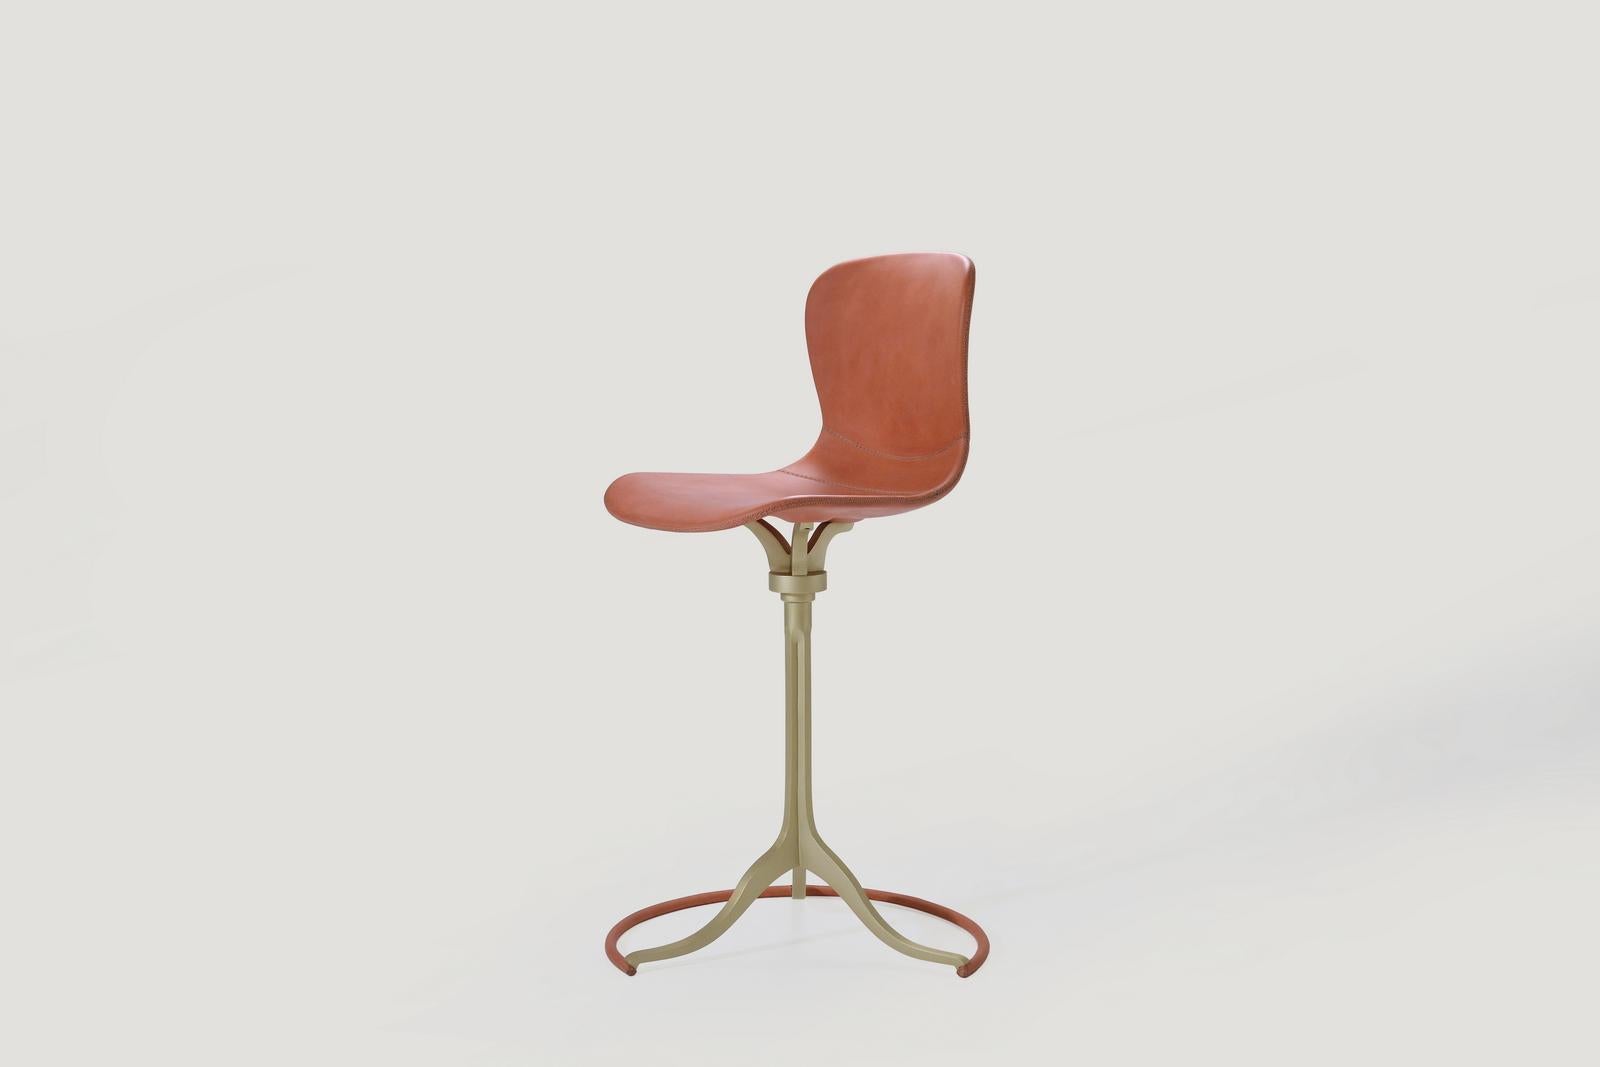 Model: PT471 Counter-height chair + swivel + ring
Seat: leather
Seat color: Vieux Rose
Base: PT471 sand cast brass
Base finish: Golden sand
Dimensions: W 55 x D 52 x H 101  Seat H 67 cm
W 21.65 x D 20.27 x H 39.76  Seat H 26.38 in

Handmade,